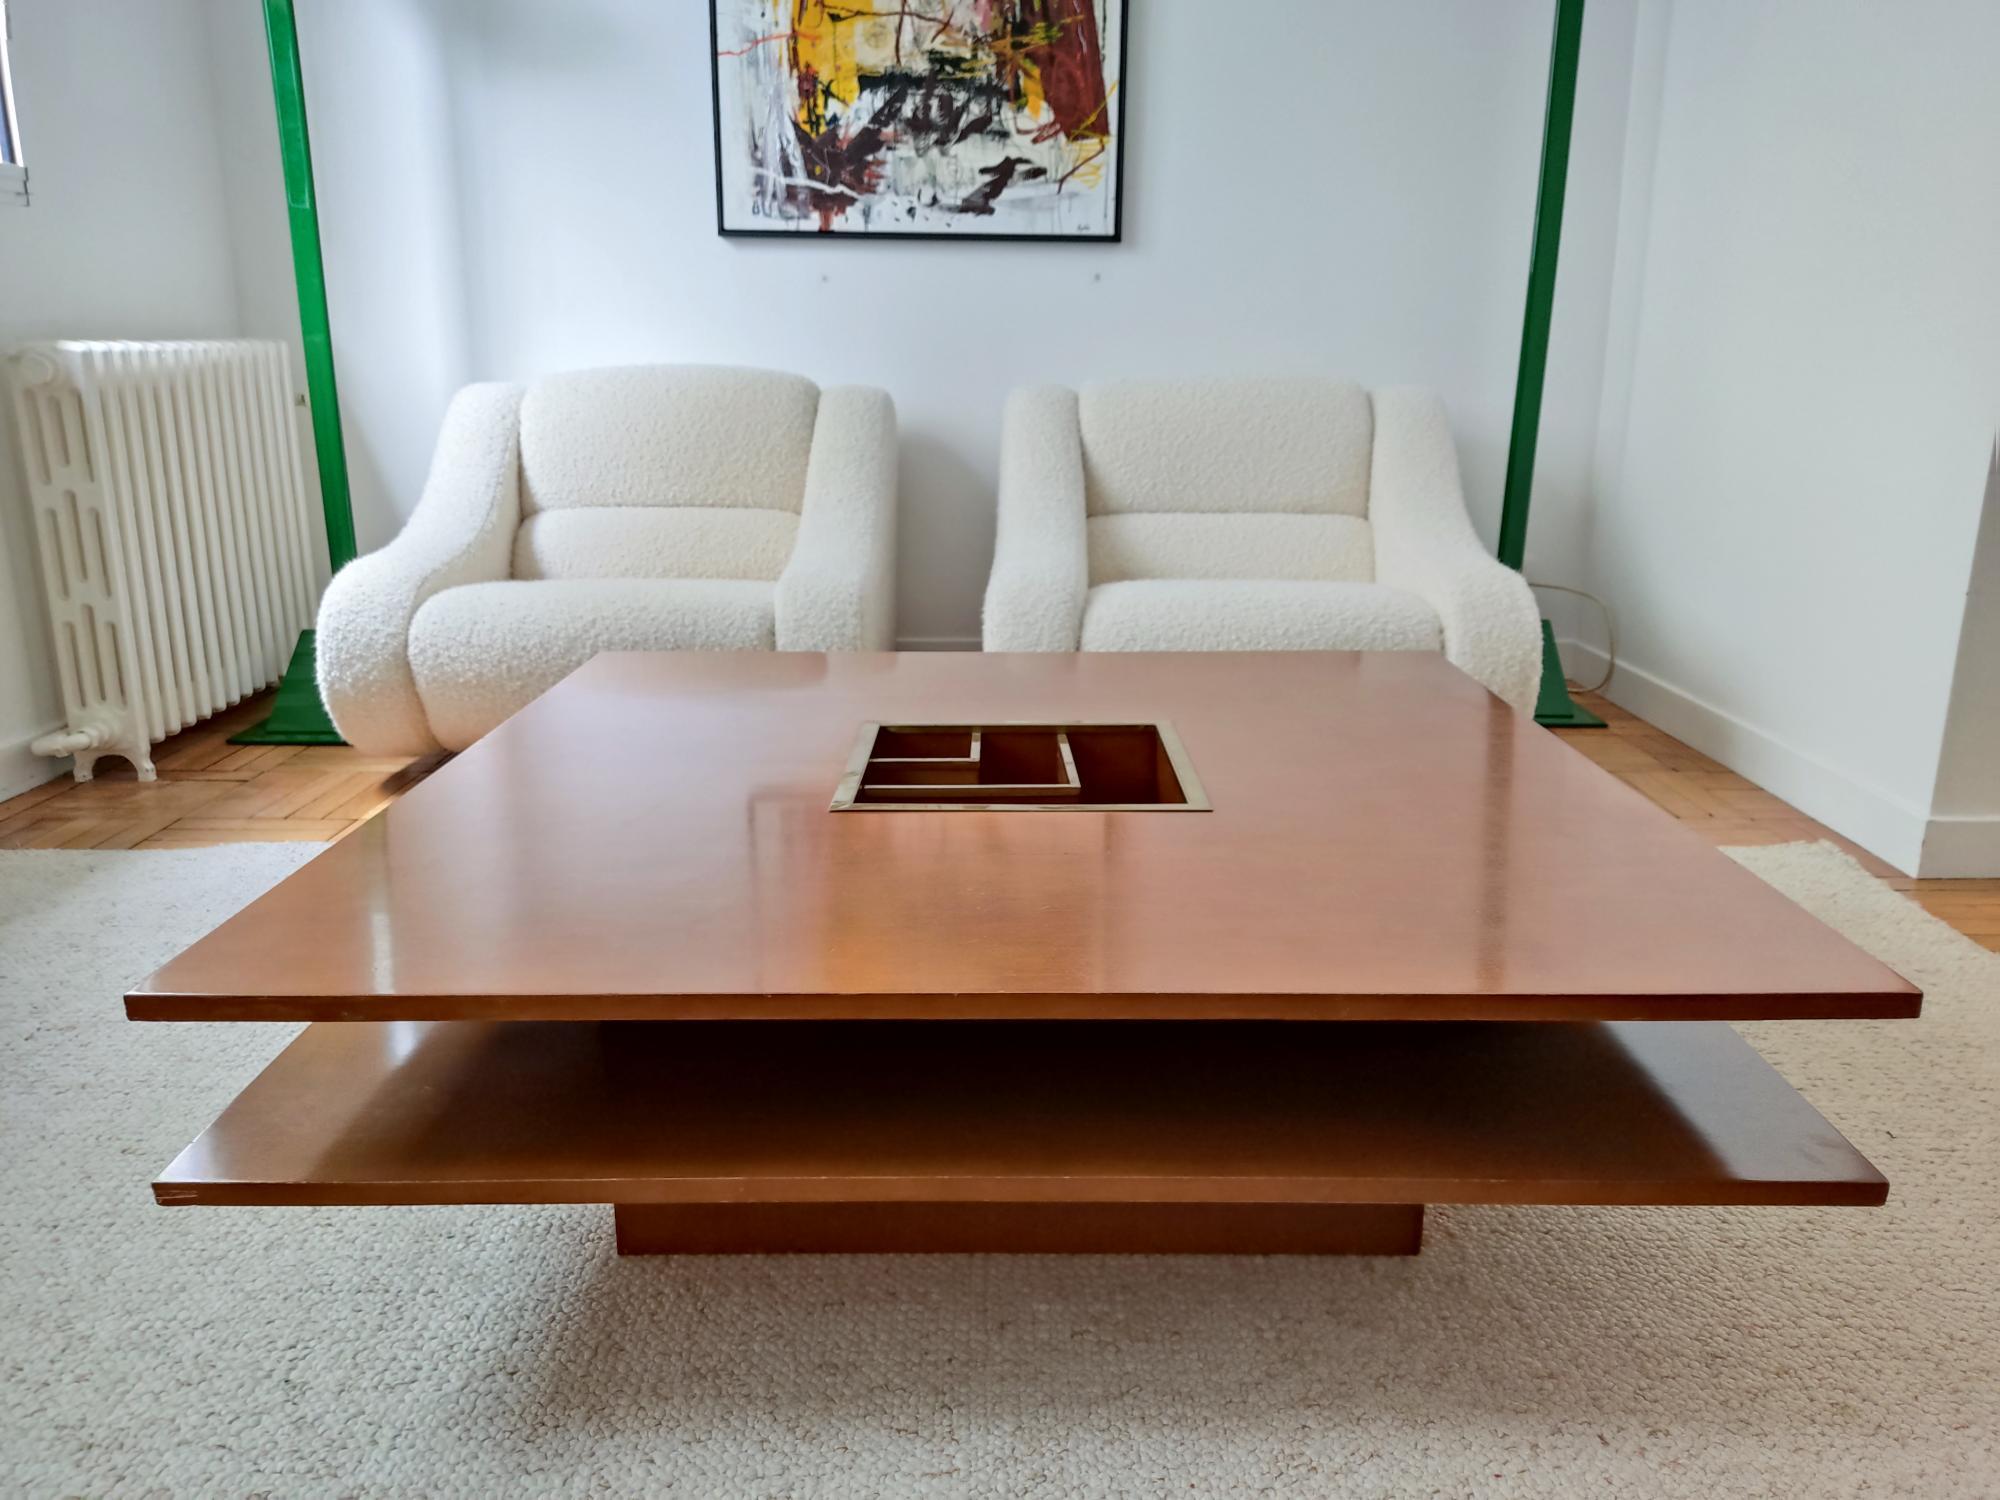 Large Italian coffee table from the 1970s. The double square wooden top gives it an airy side. The integration of a graphic brass tray in the middle gives a lot of chic and elegance to this table.
slight missing wood on the edges which can be